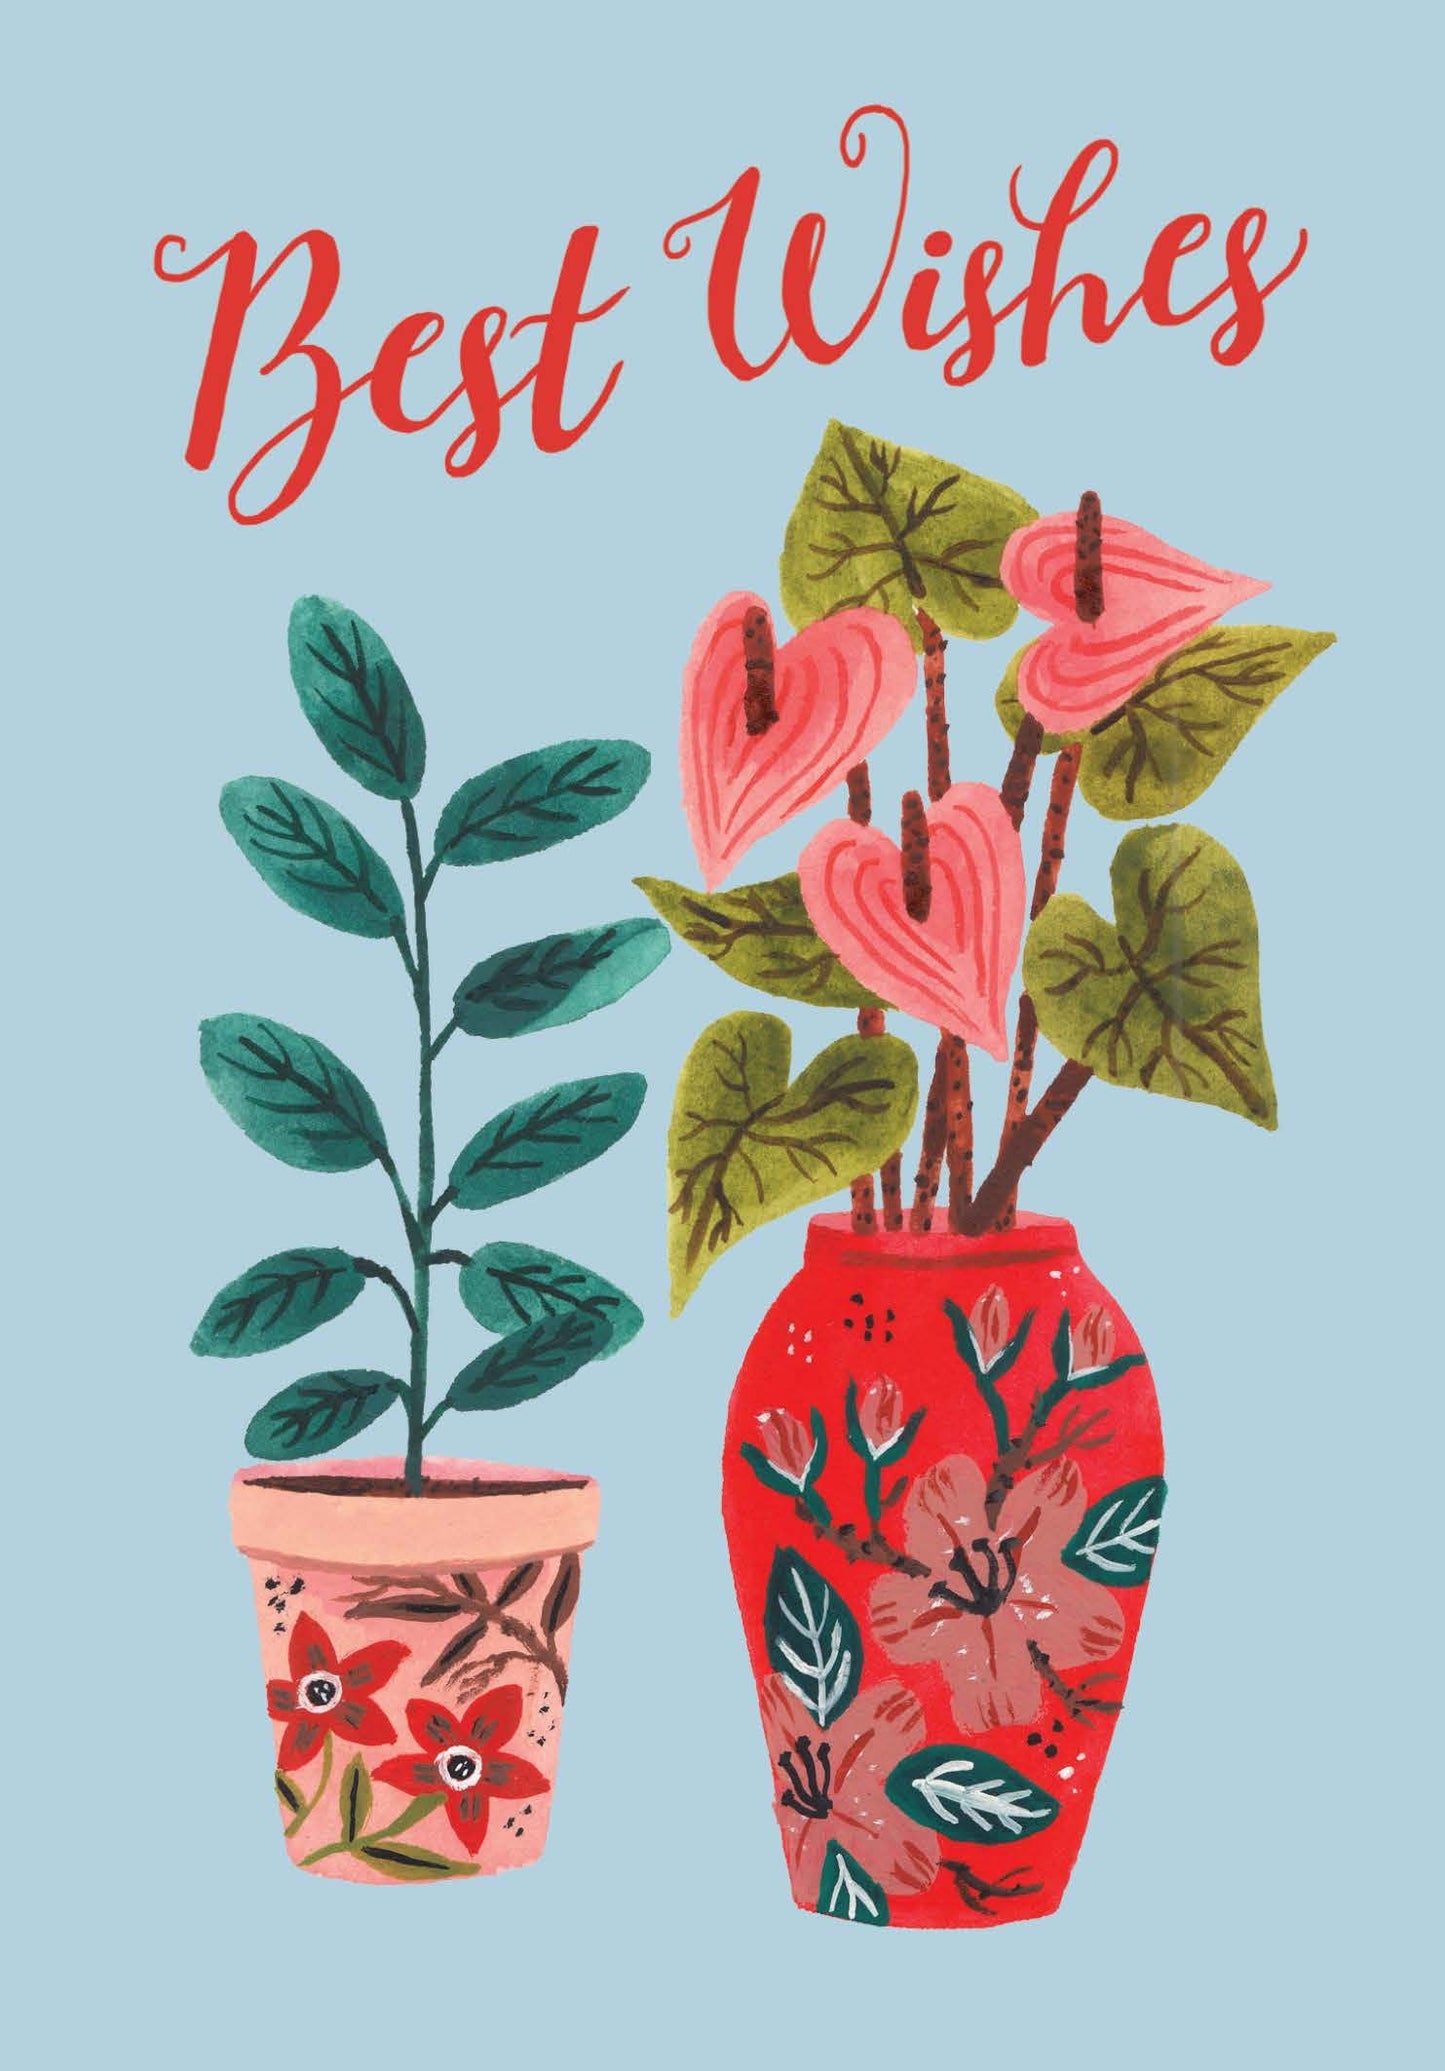 NUOVO - "BEST WISHES" VASES GREETING CARD